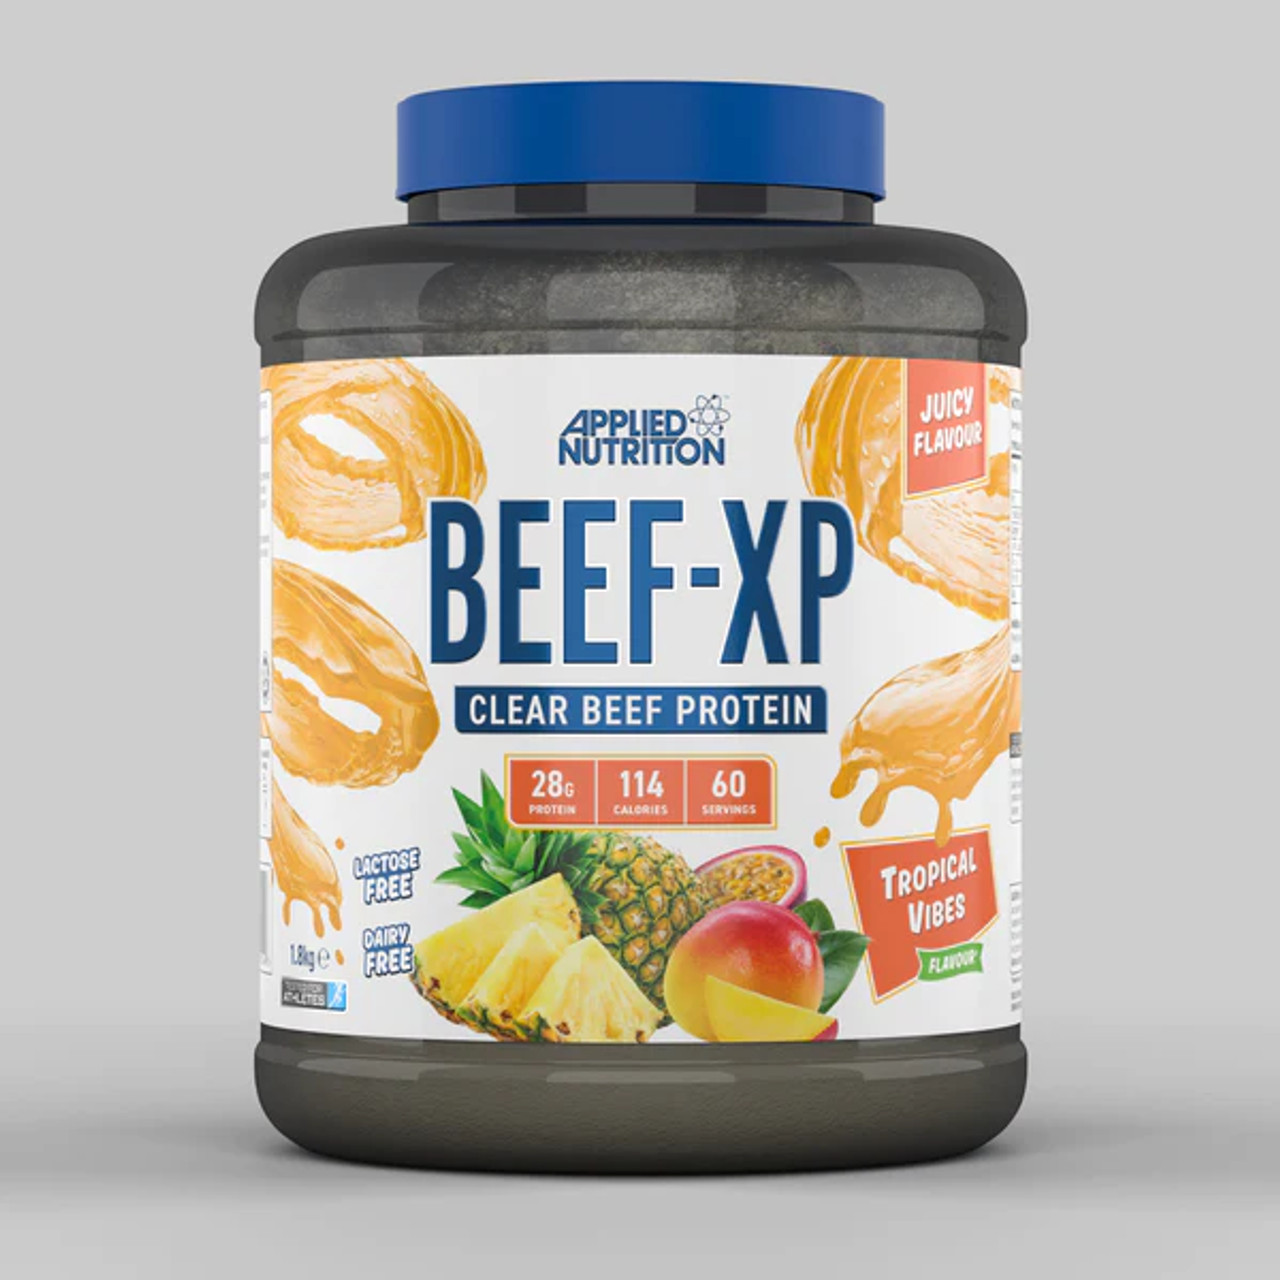 CLEAR HYDROLYSED BEEF-XP PROTEIN - 1.8kg